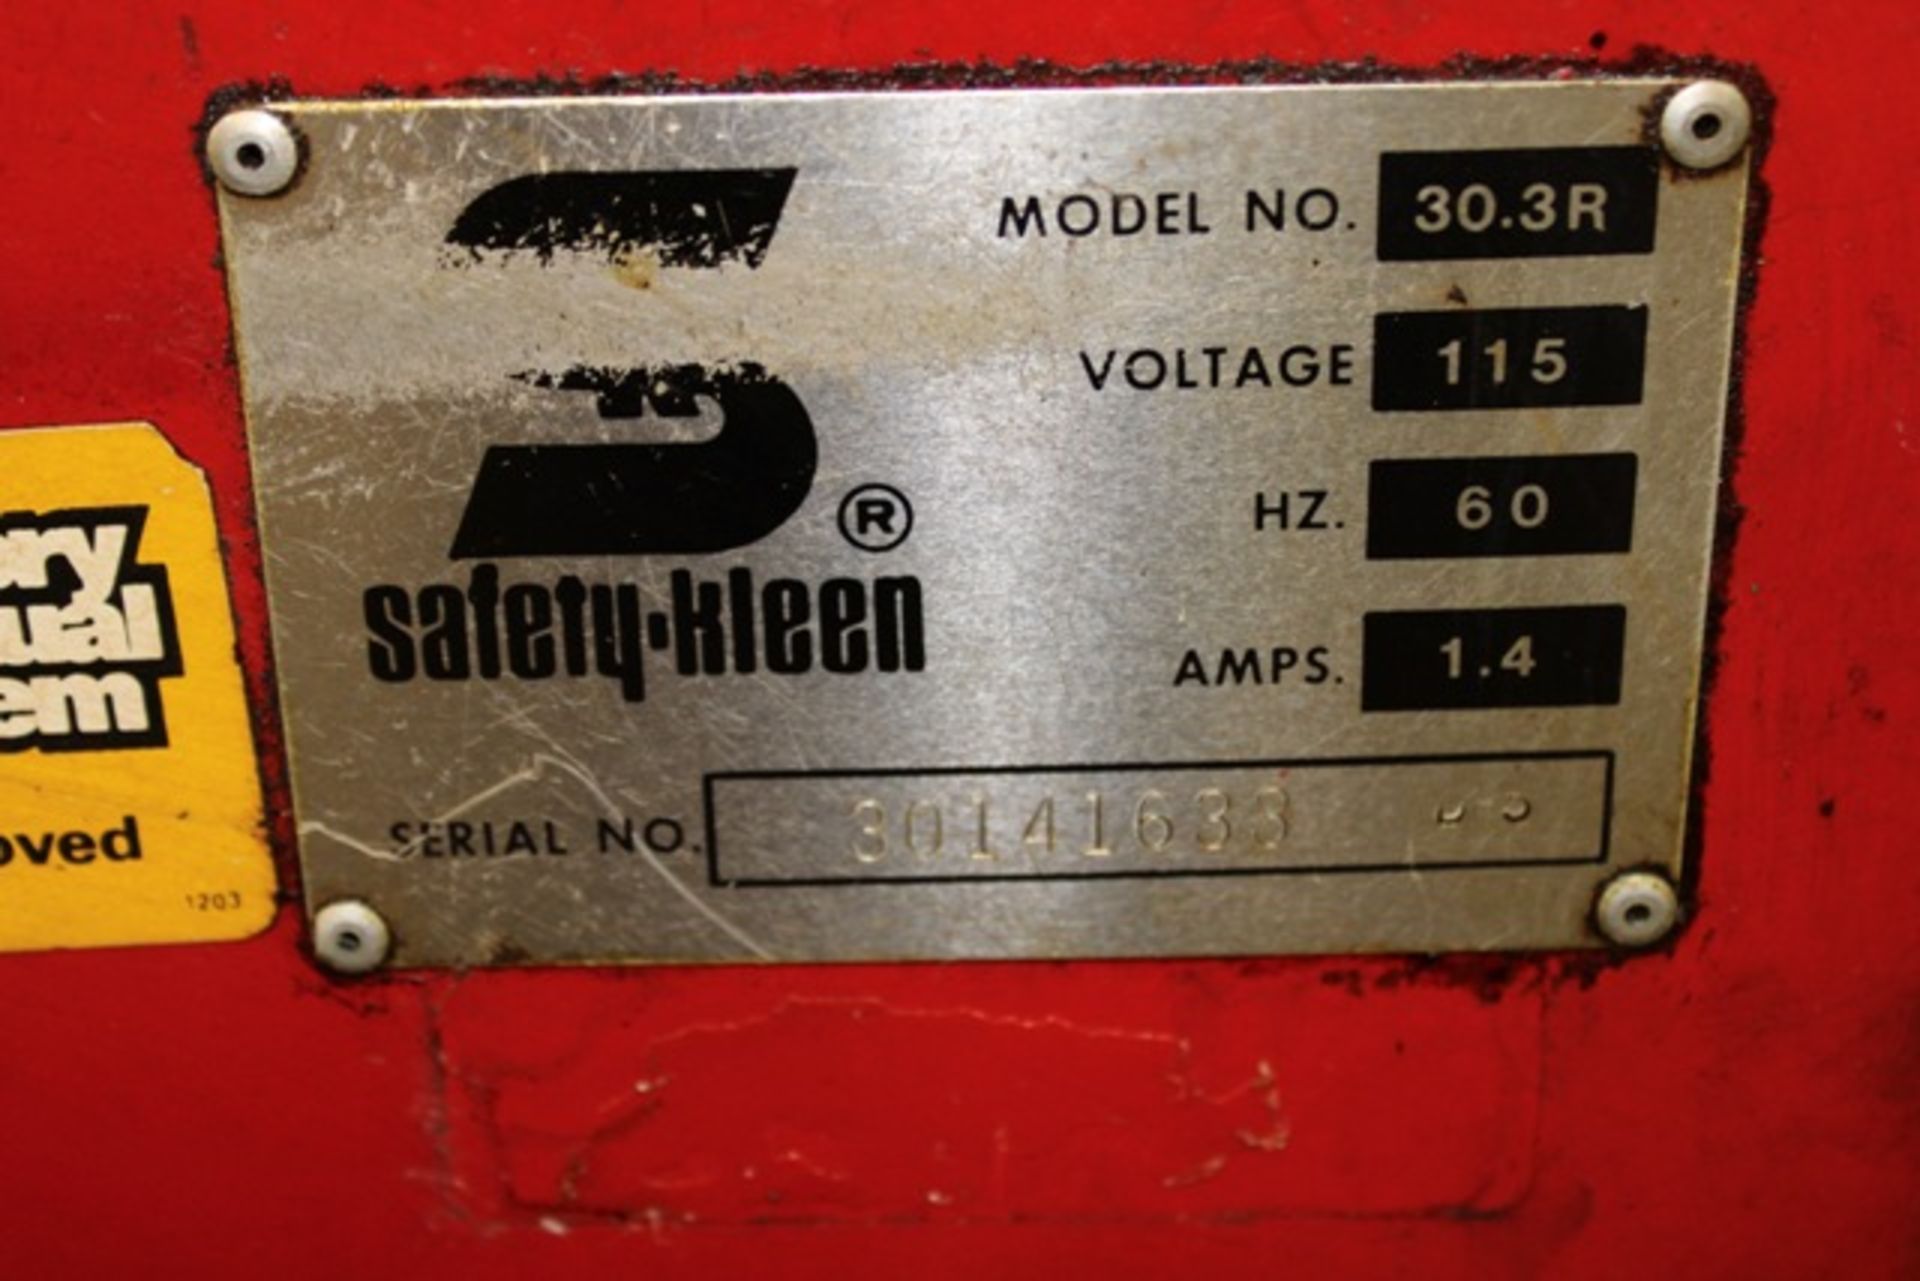 Safety-Kleen Parts Washer - Image 2 of 2